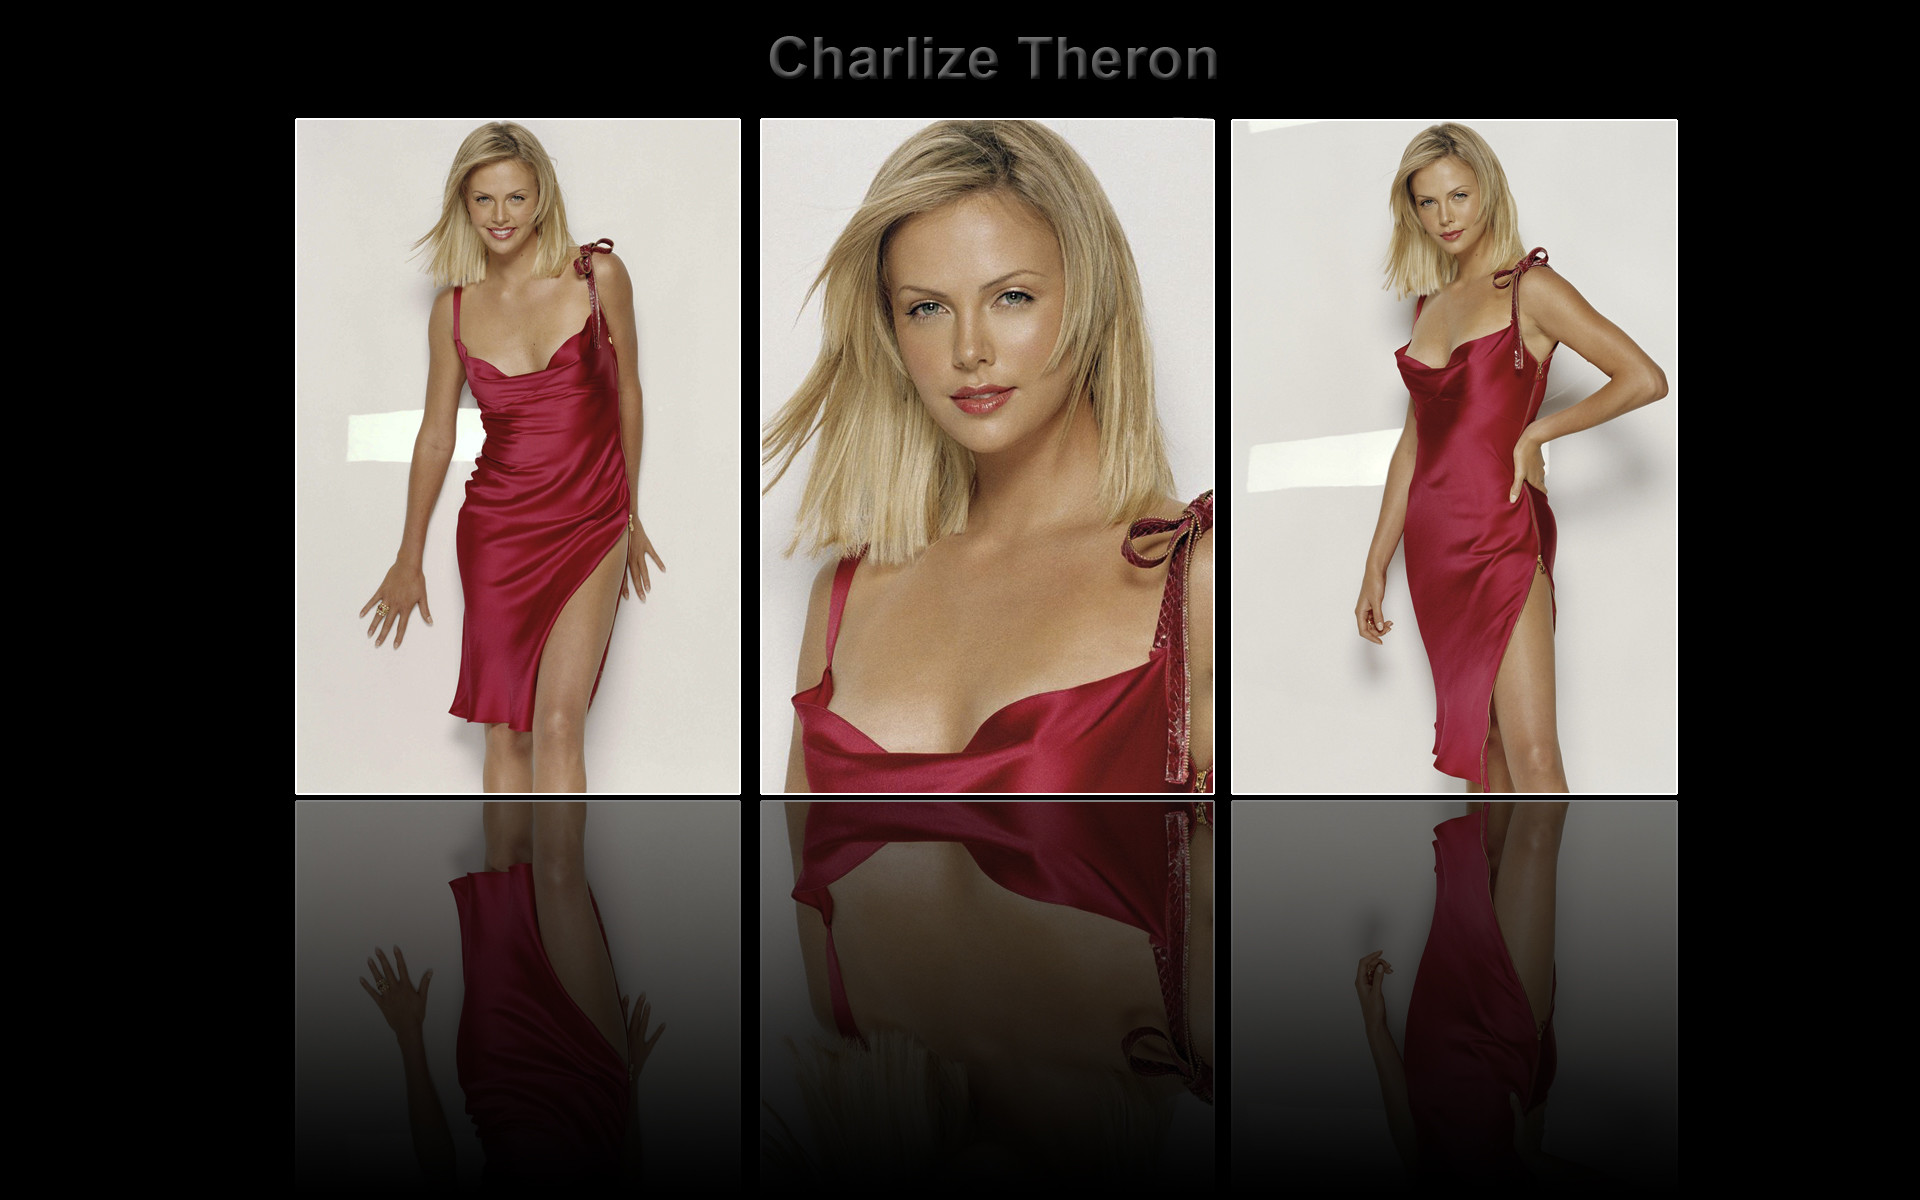 1920x1200 Charlize Theron Wallpaper 1 by Balhirath